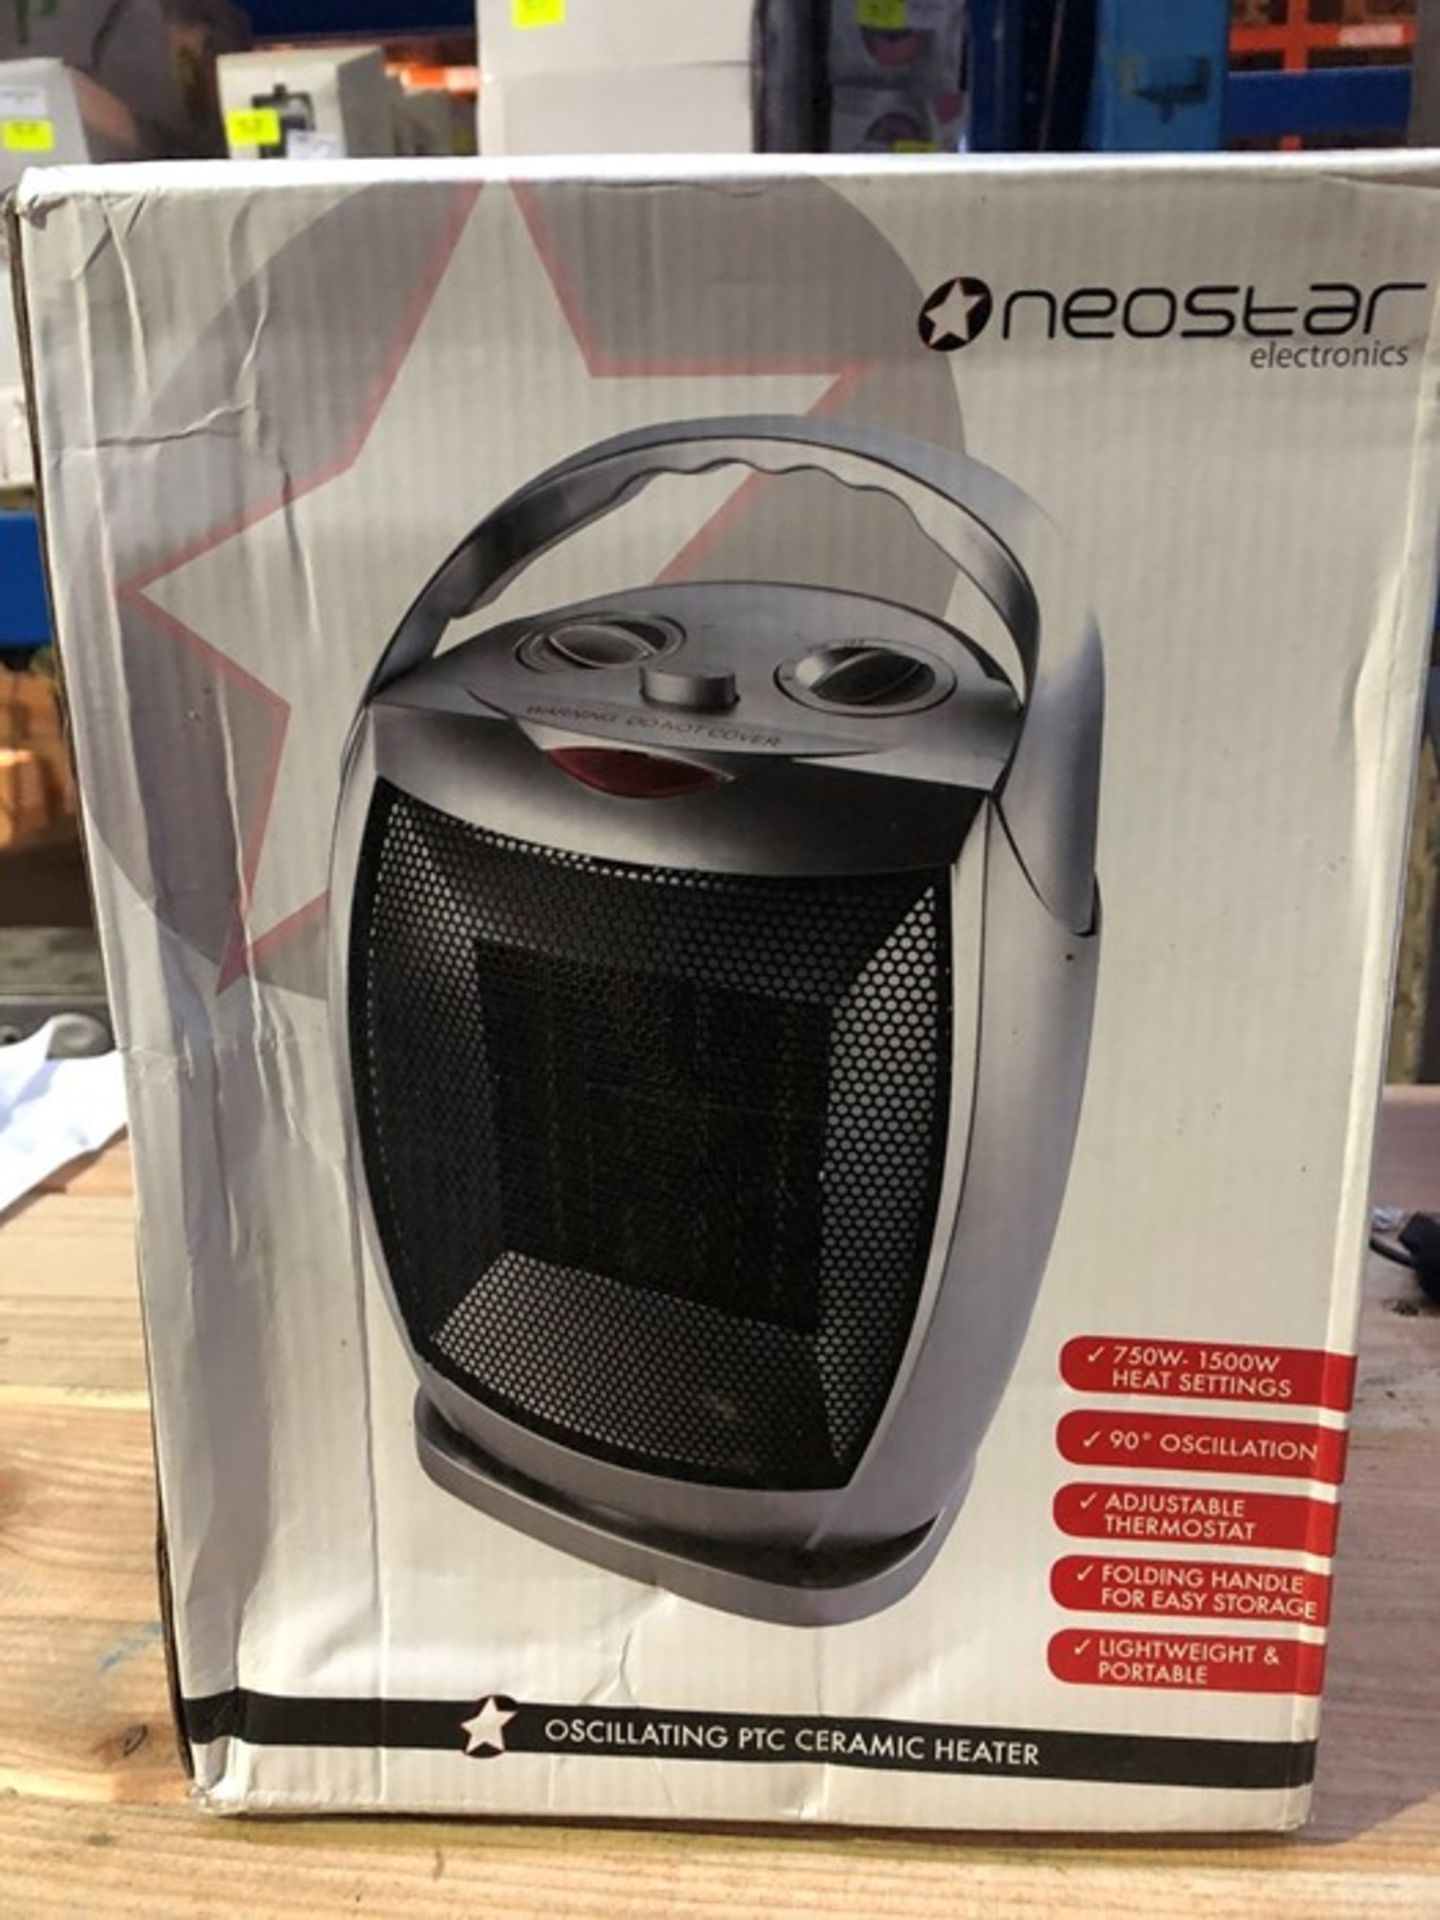 1 BOXED NEOSTAR ELECTRONICS OSCILLATING PTC CERAMIC HEATER / RRP £24.99 (PUBLIC VIEWING AVAILABLE)